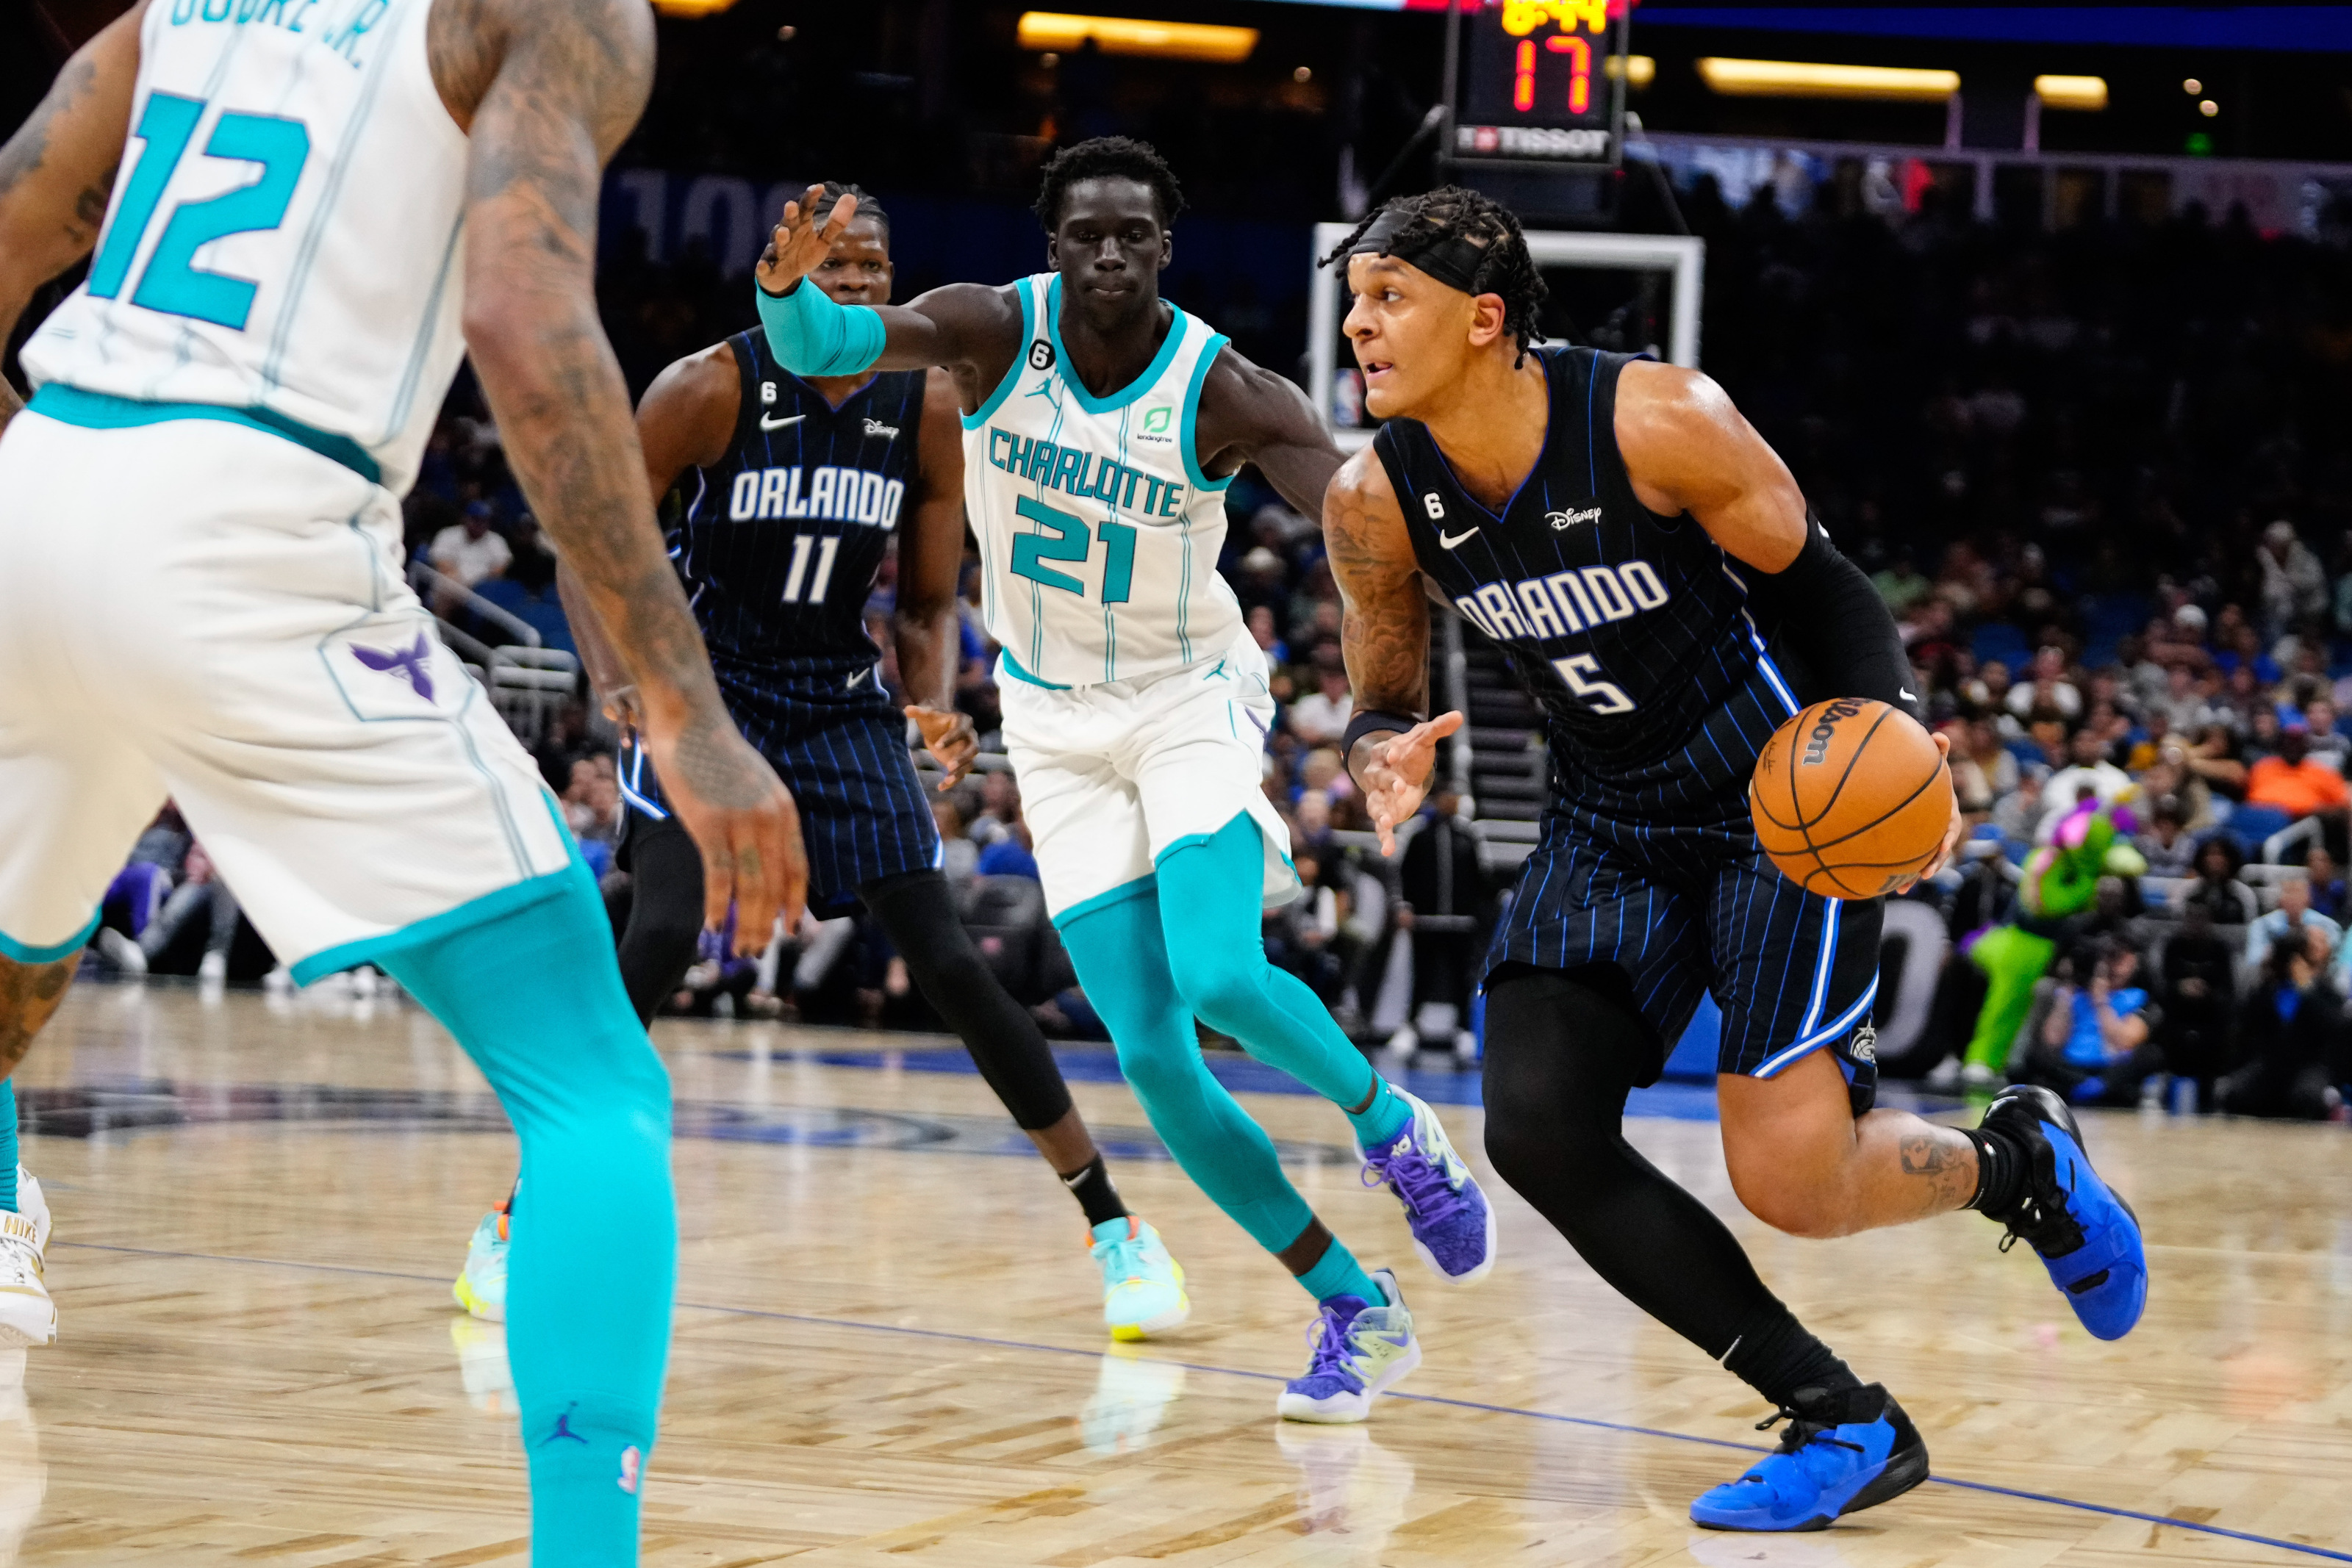 Orlando Magic on X: today's fit #SpaceJam x #MagicTogether https